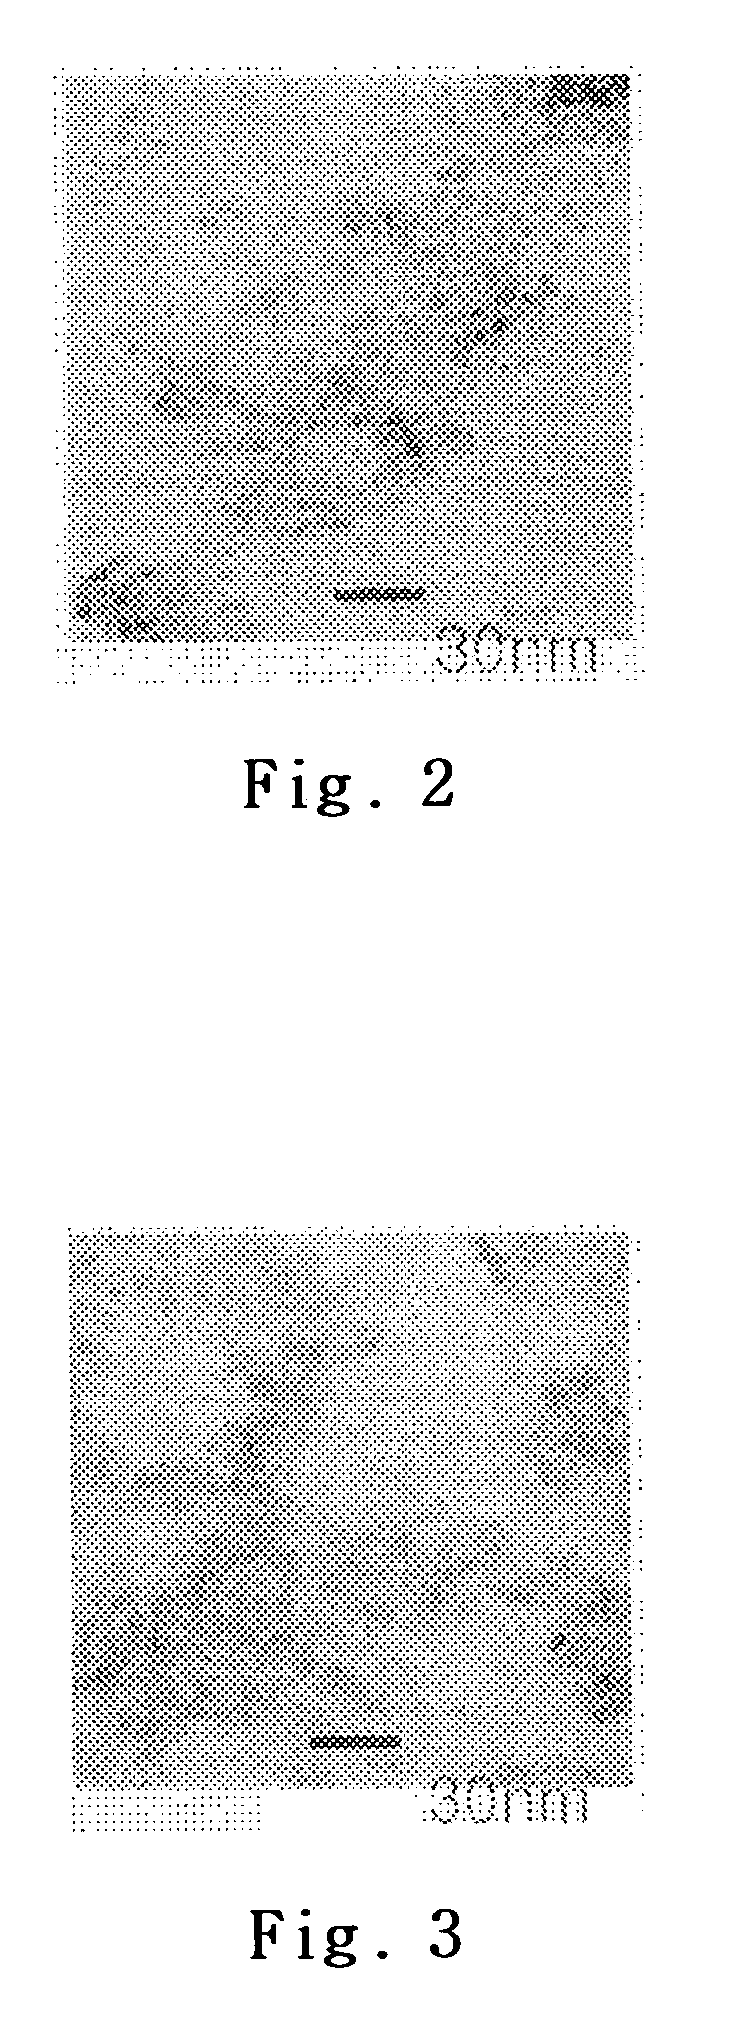 Shape anisotropic metal oxide nanoparticles and synthetic method thereof